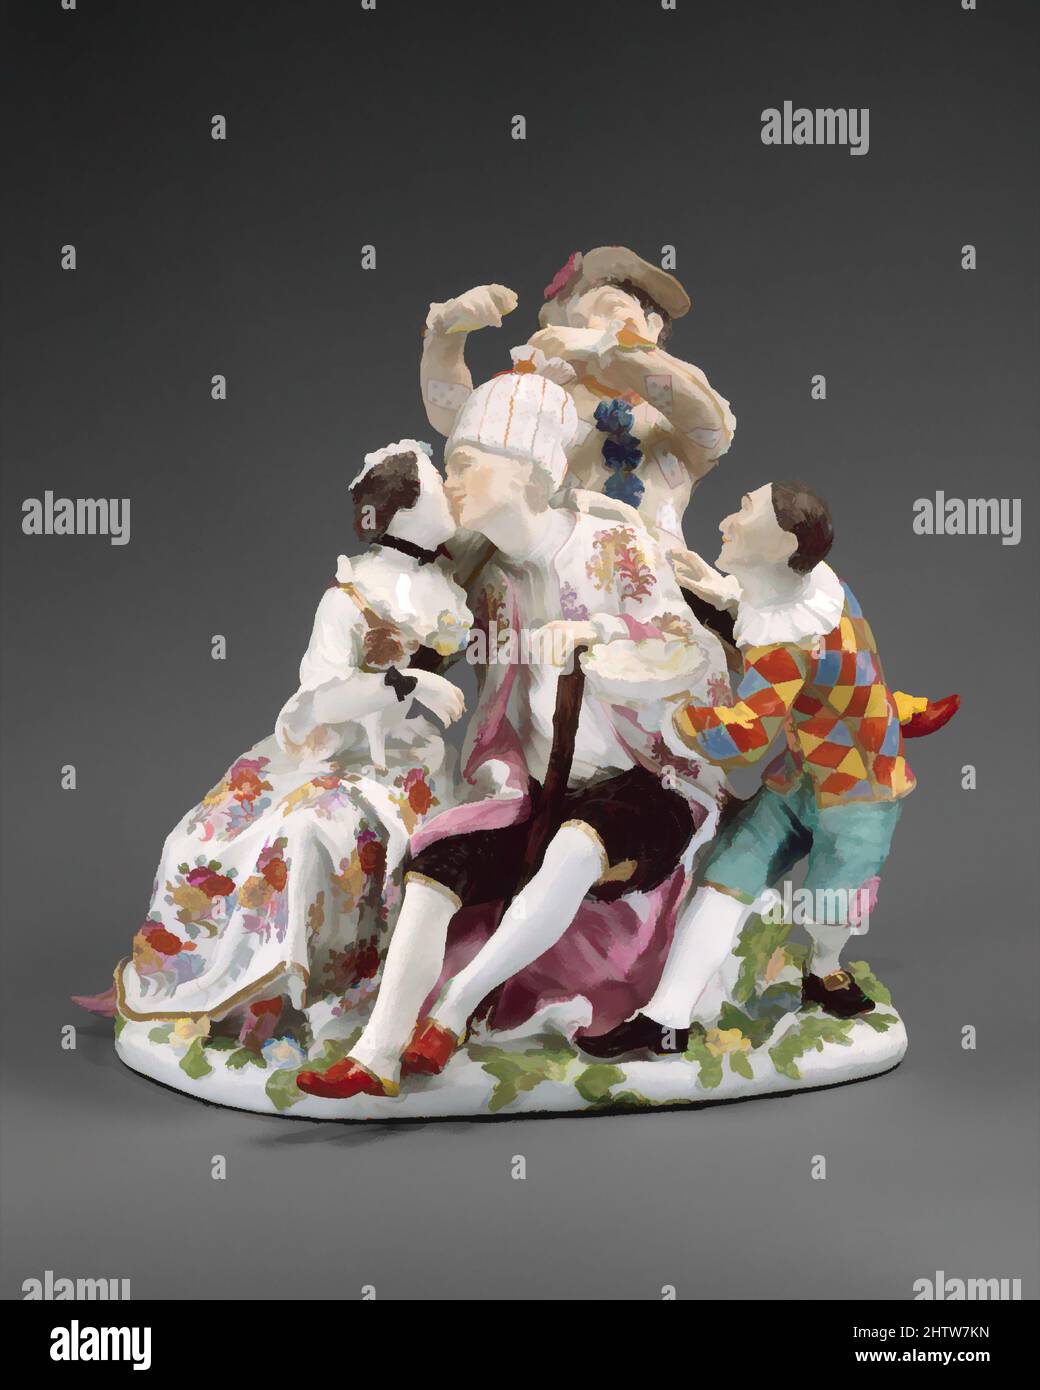 Art inspired by The Deceived Weakling, model ca. 1740, German, Meissen, Hard-paste porcelain, Height: 7 5/16 in. (18.6 cm), Ceramics-Porcelain, Classic works modernized by Artotop with a splash of modernity. Shapes, color and value, eye-catching visual impact on art. Emotions through freedom of artworks in a contemporary way. A timeless message pursuing a wildly creative new direction. Artists turning to the digital medium and creating the Artotop NFT Stock Photo